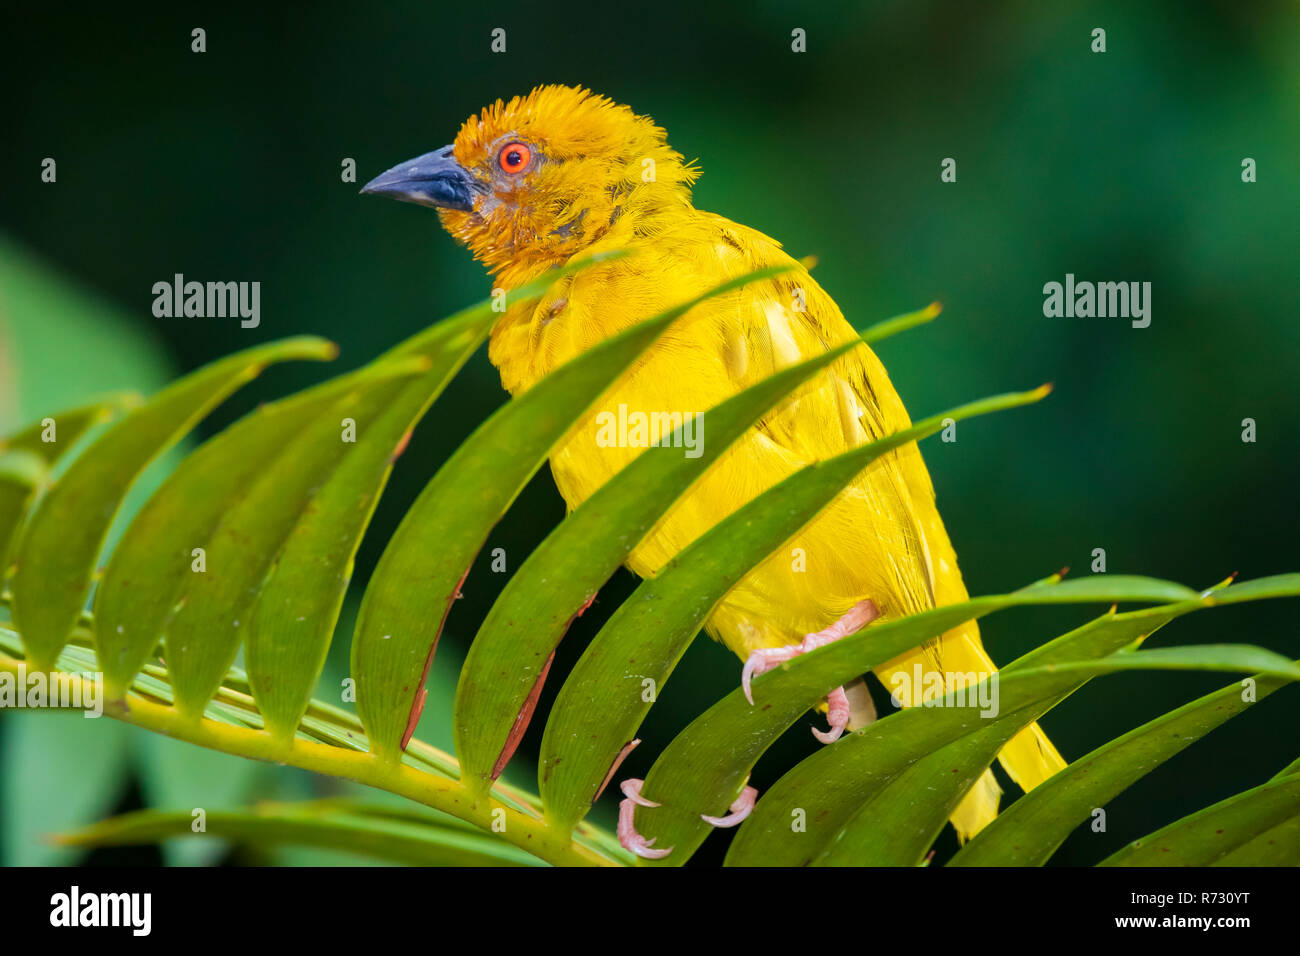 Male Eastern Golden Weaver bird Ploceus subaureus is common from Kenya to the Eastern Cape and as far inland as Malawi. Inhabits coastal plains, river Stock Photo